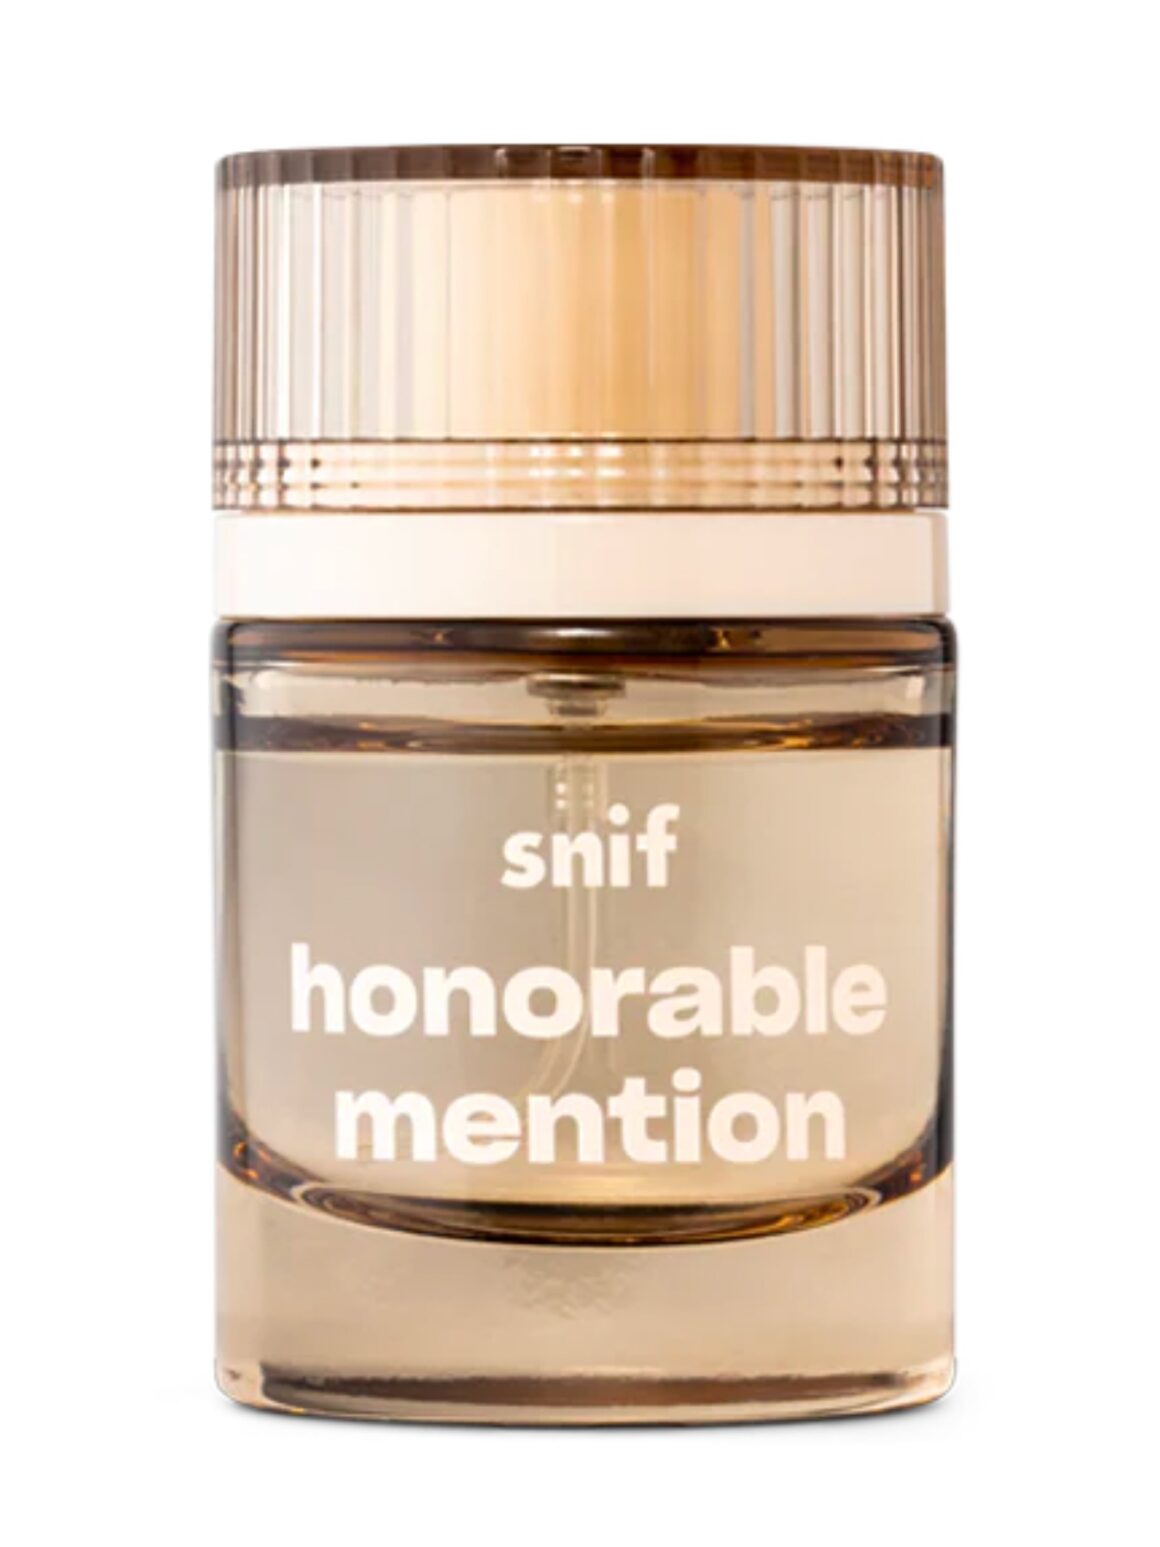 Snif honorable mention